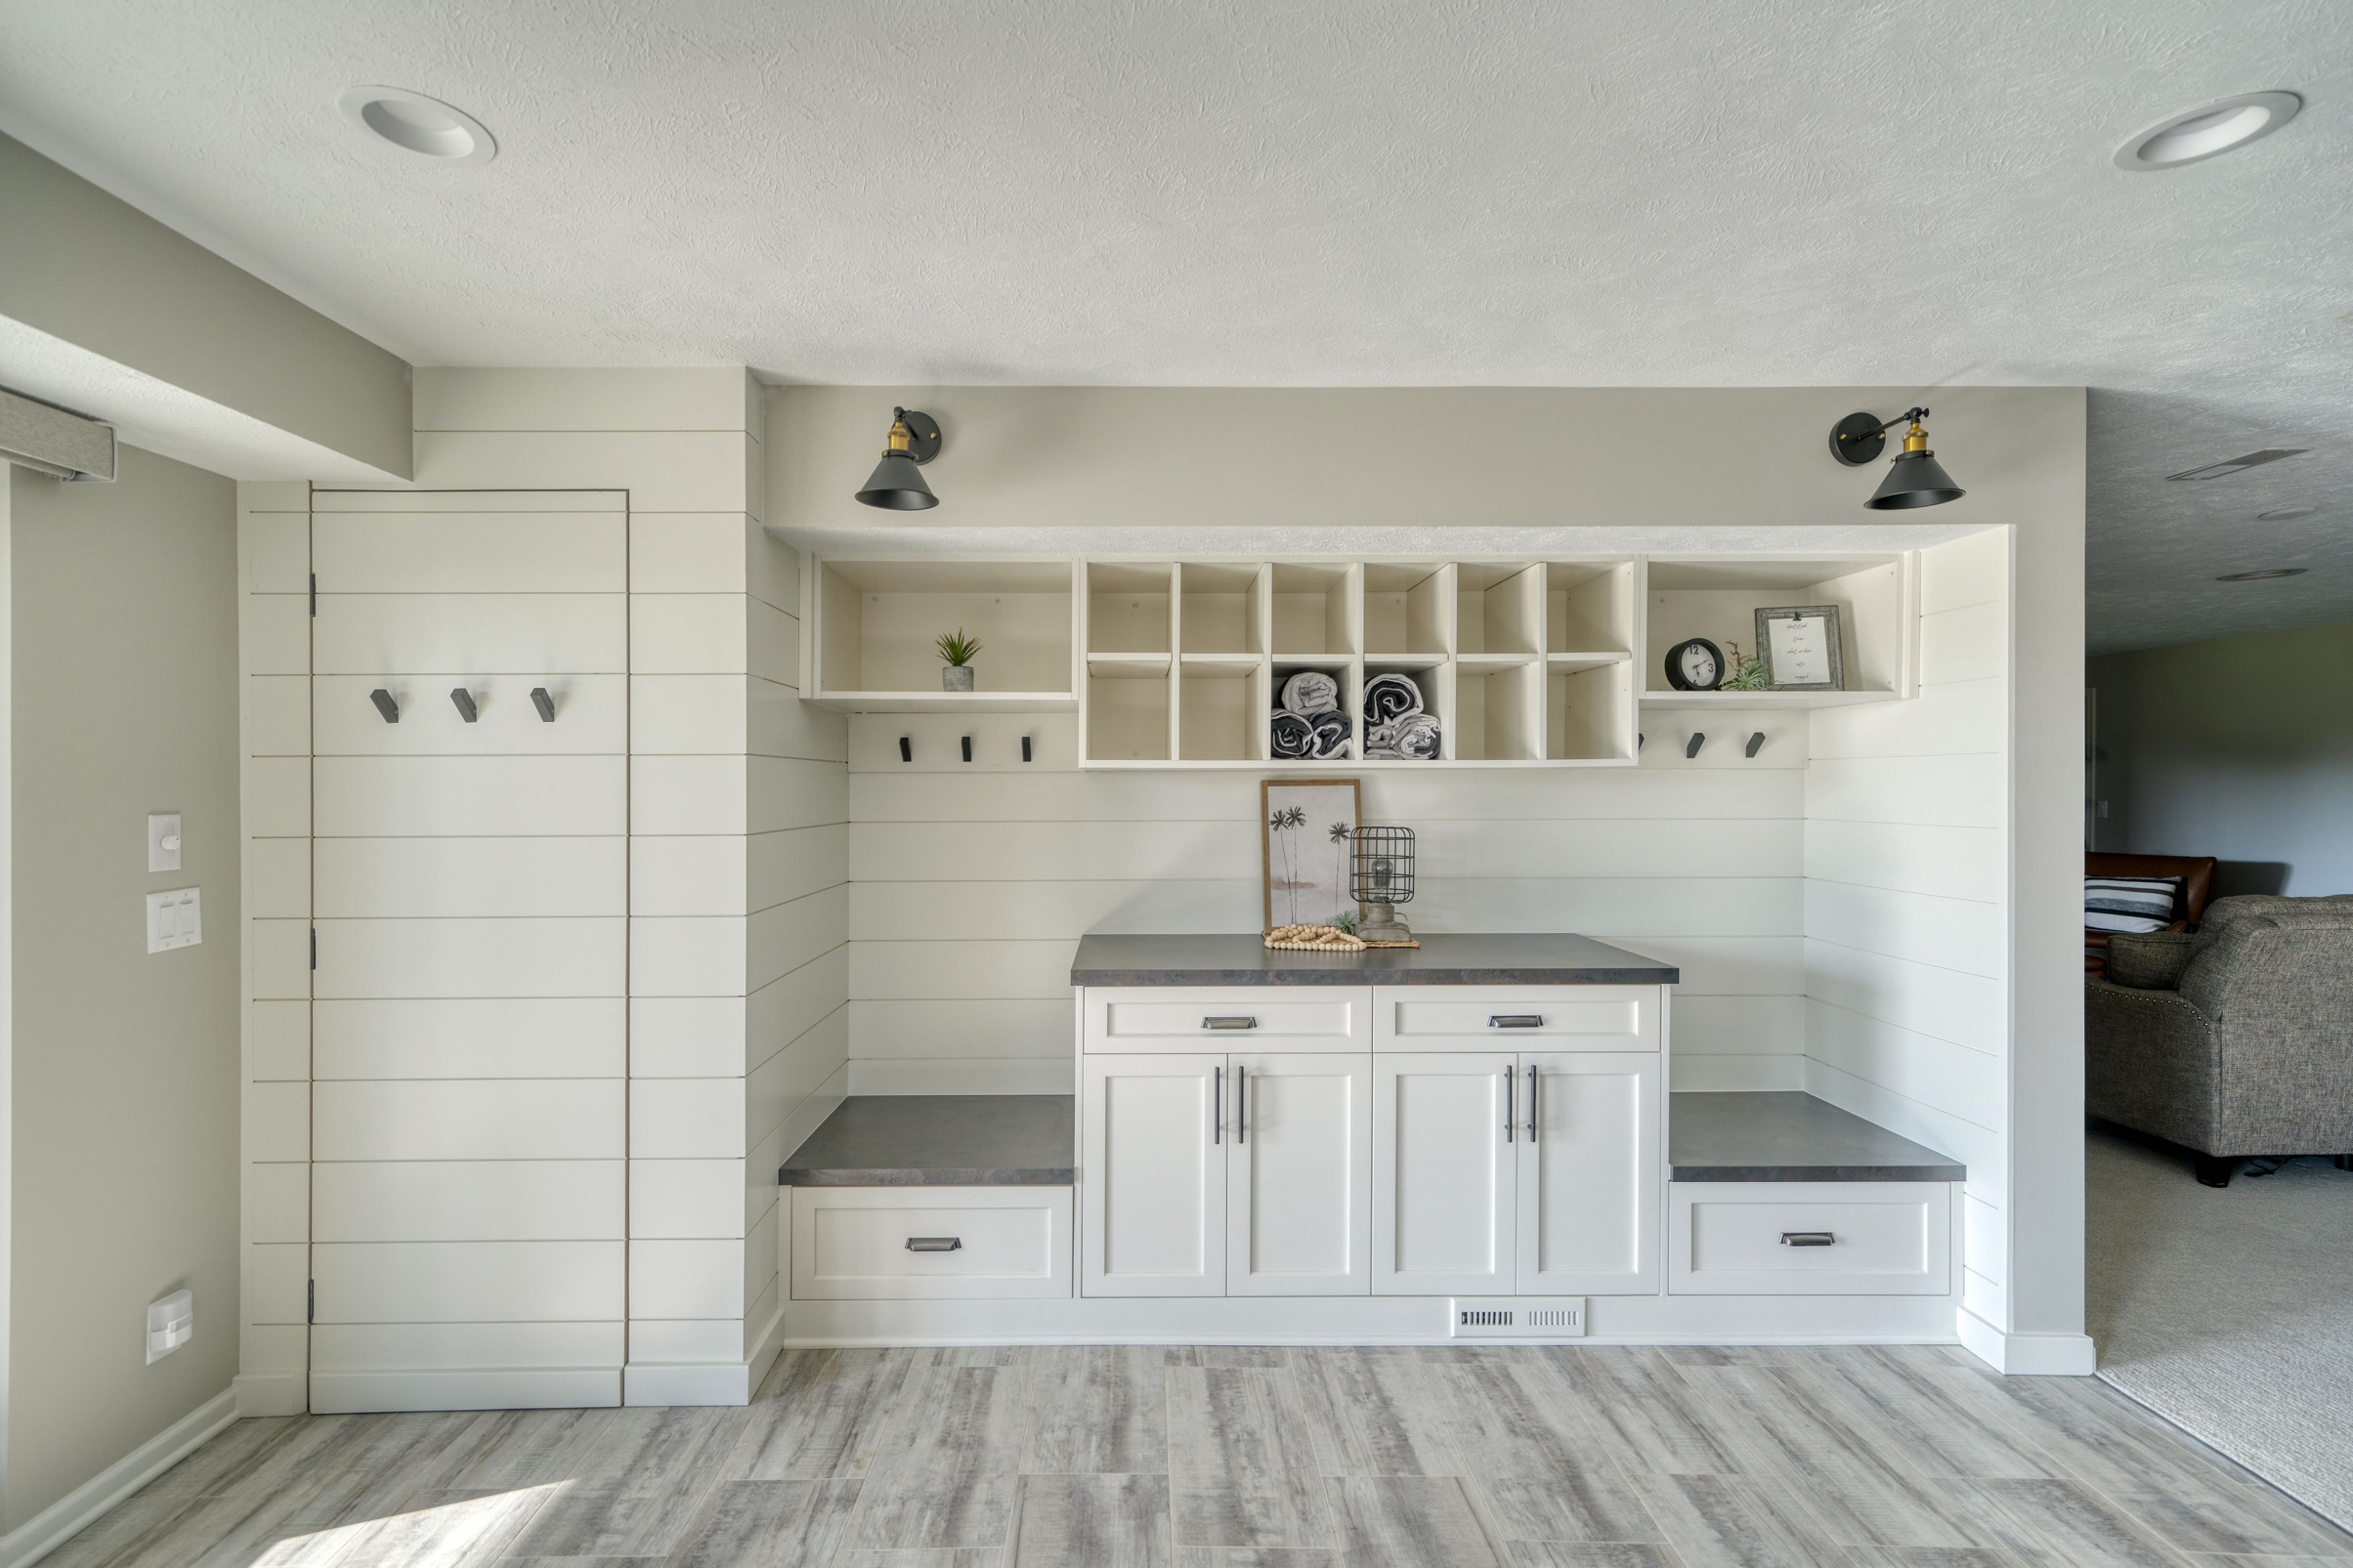 Mudroom addition with built in storage